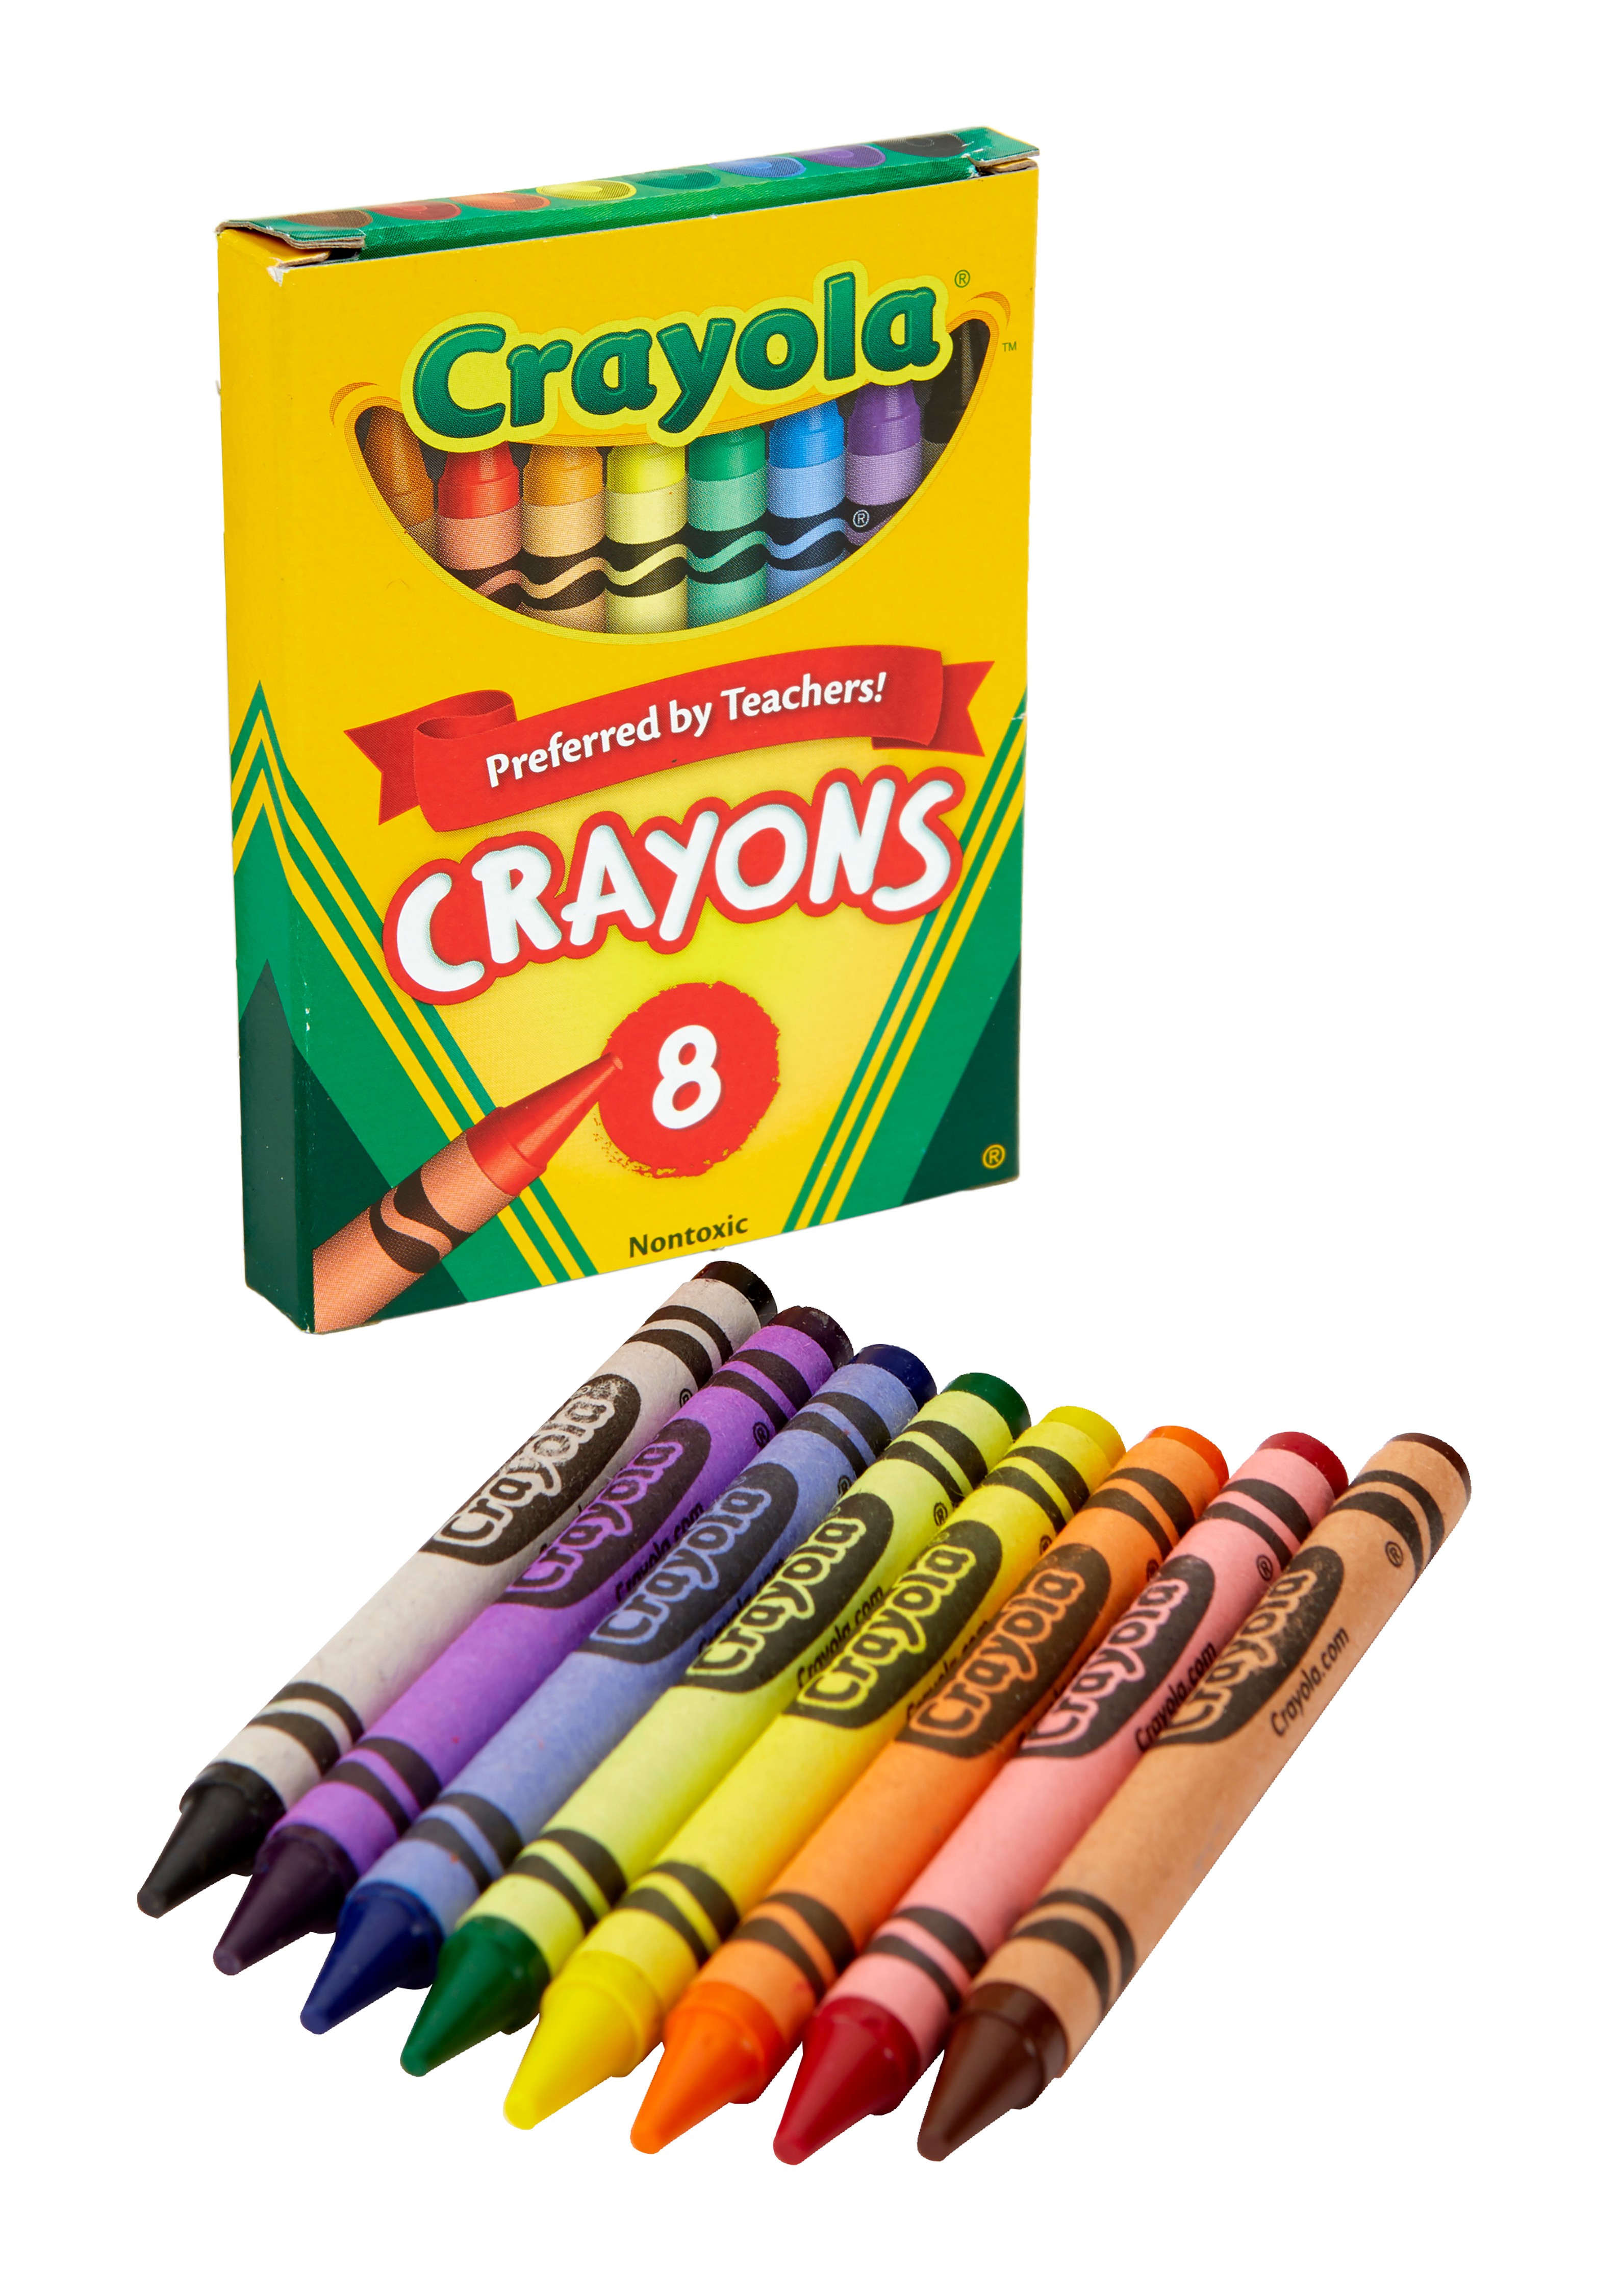 Crayola Classic Crayons, Back to School Supplies for Kids, 8 Ct, Art Supplies - image 3 of 10